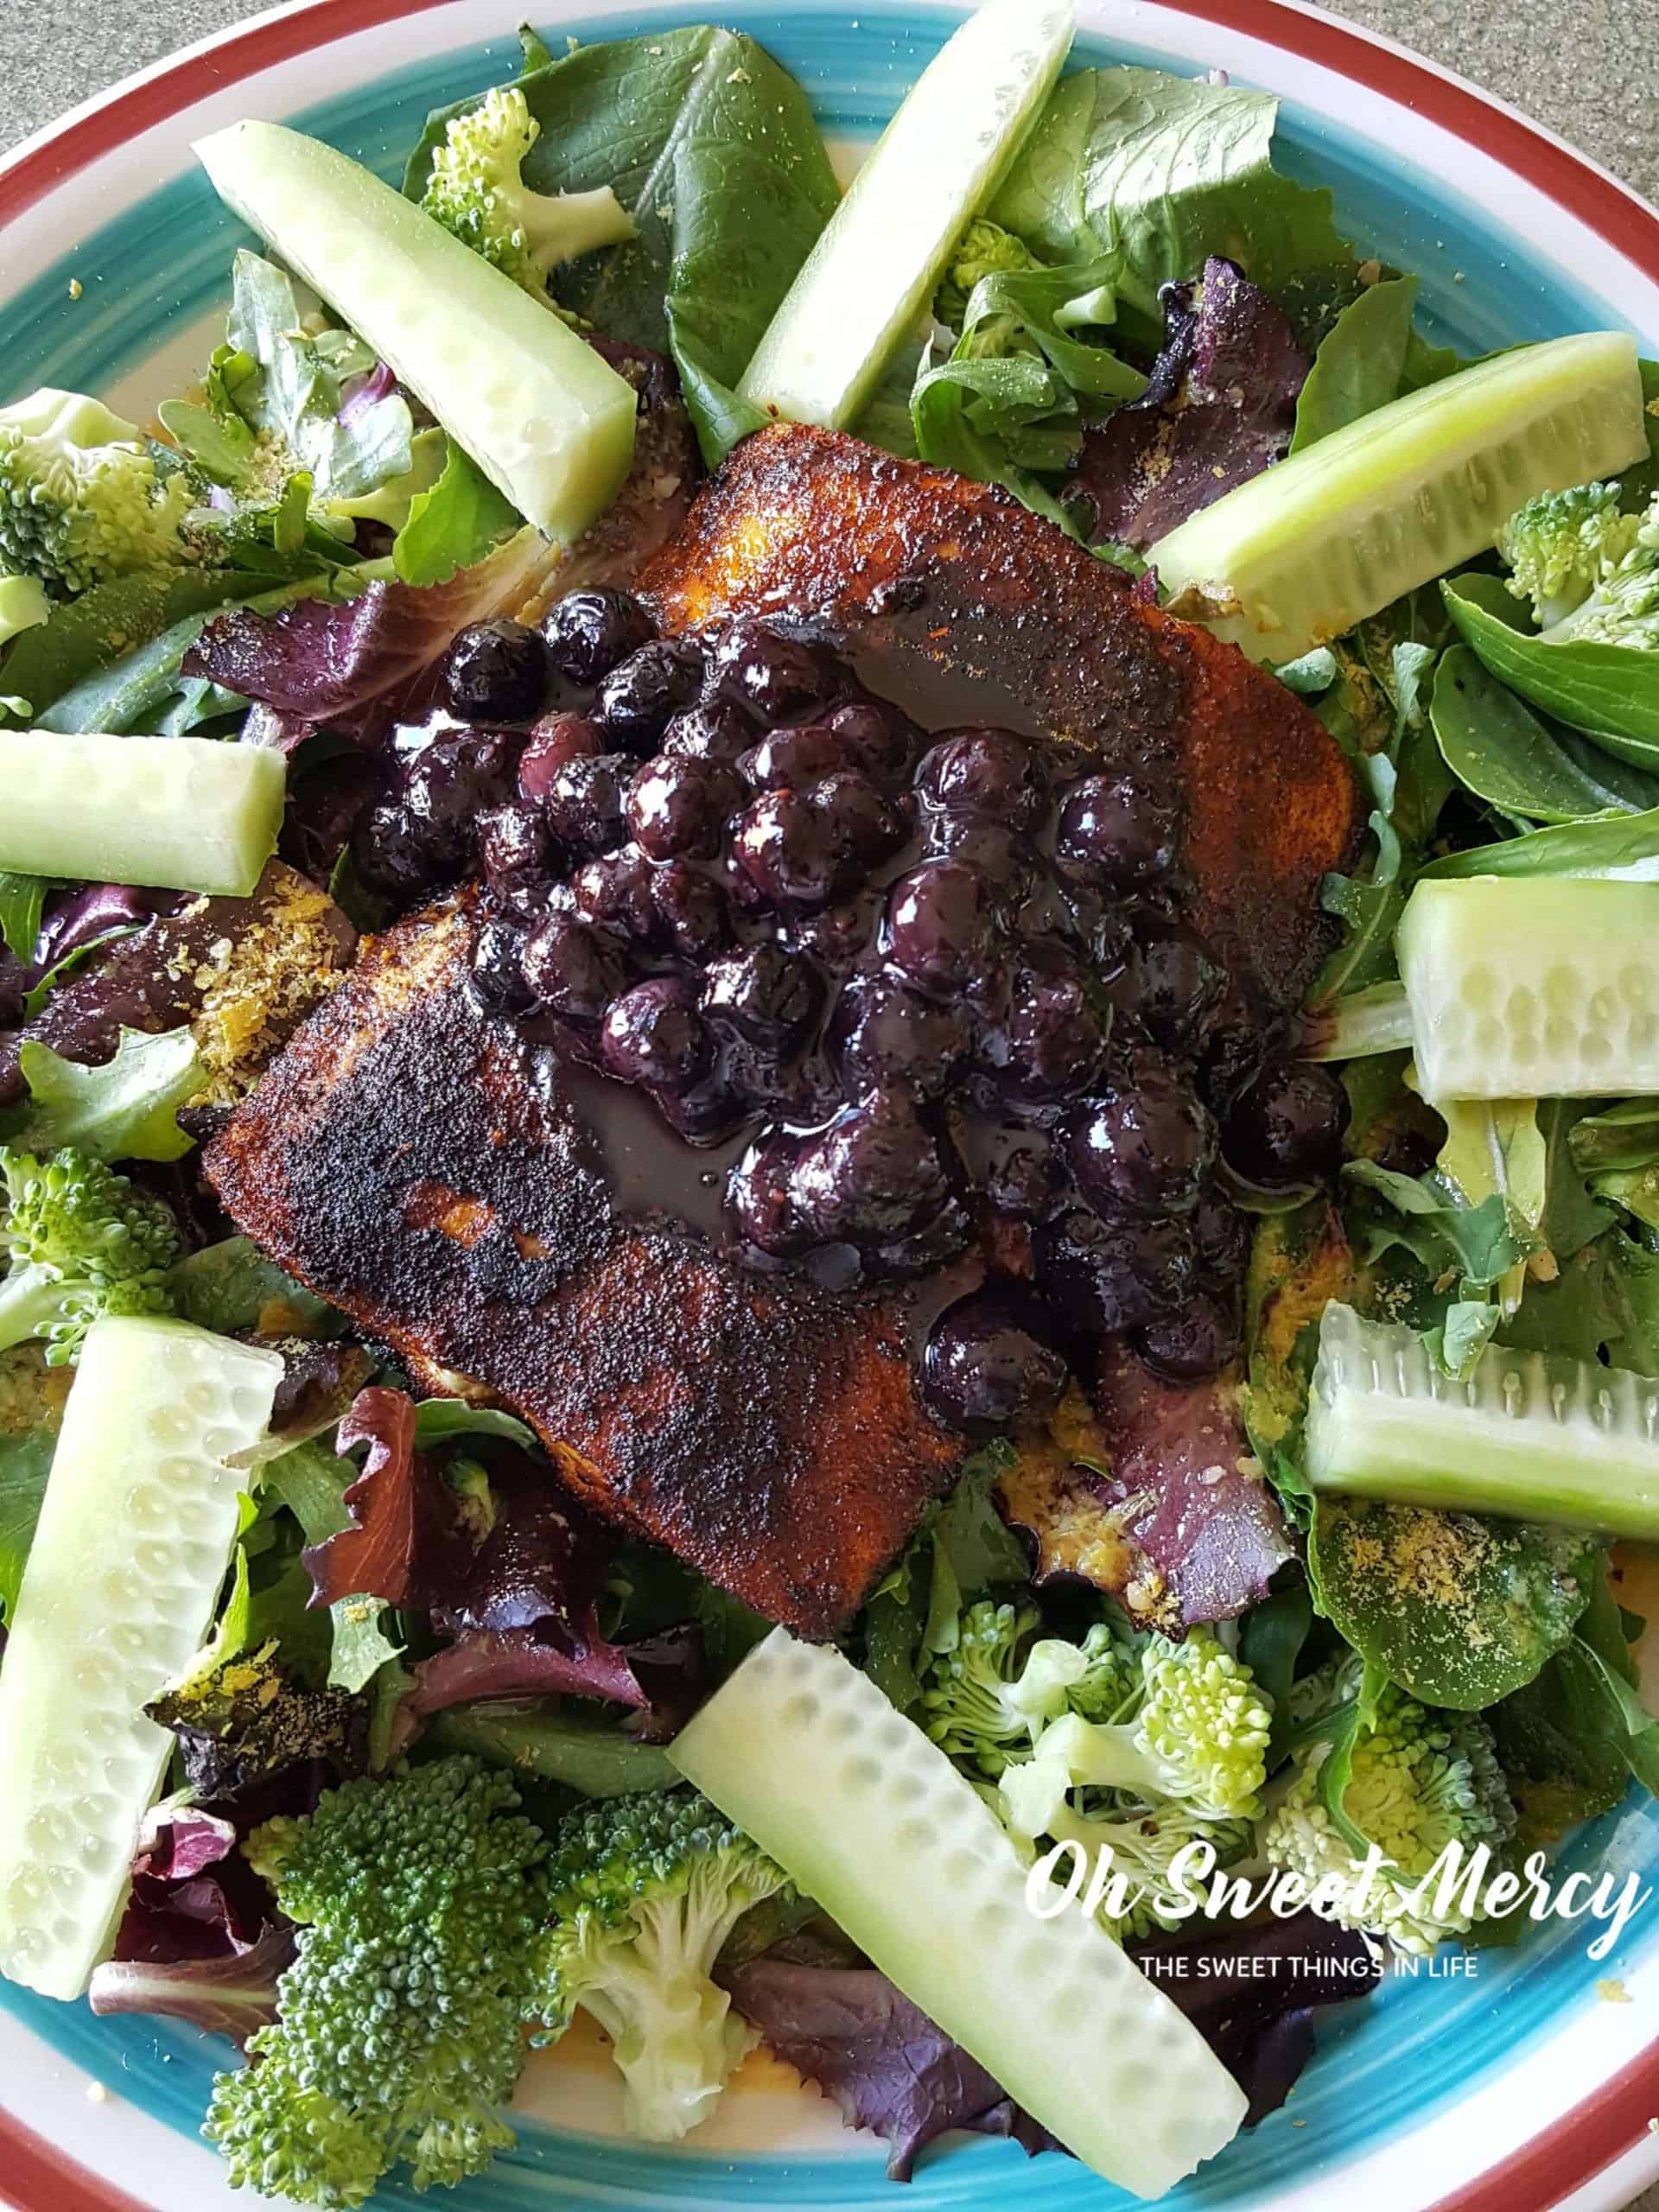 Salmon with Blueberry Sauce is a deeply nourishing dish that will make your brain happy! THM, low carb, keto friendly and all real food goodness. #lowcarb #thm #healthyfats #salmon